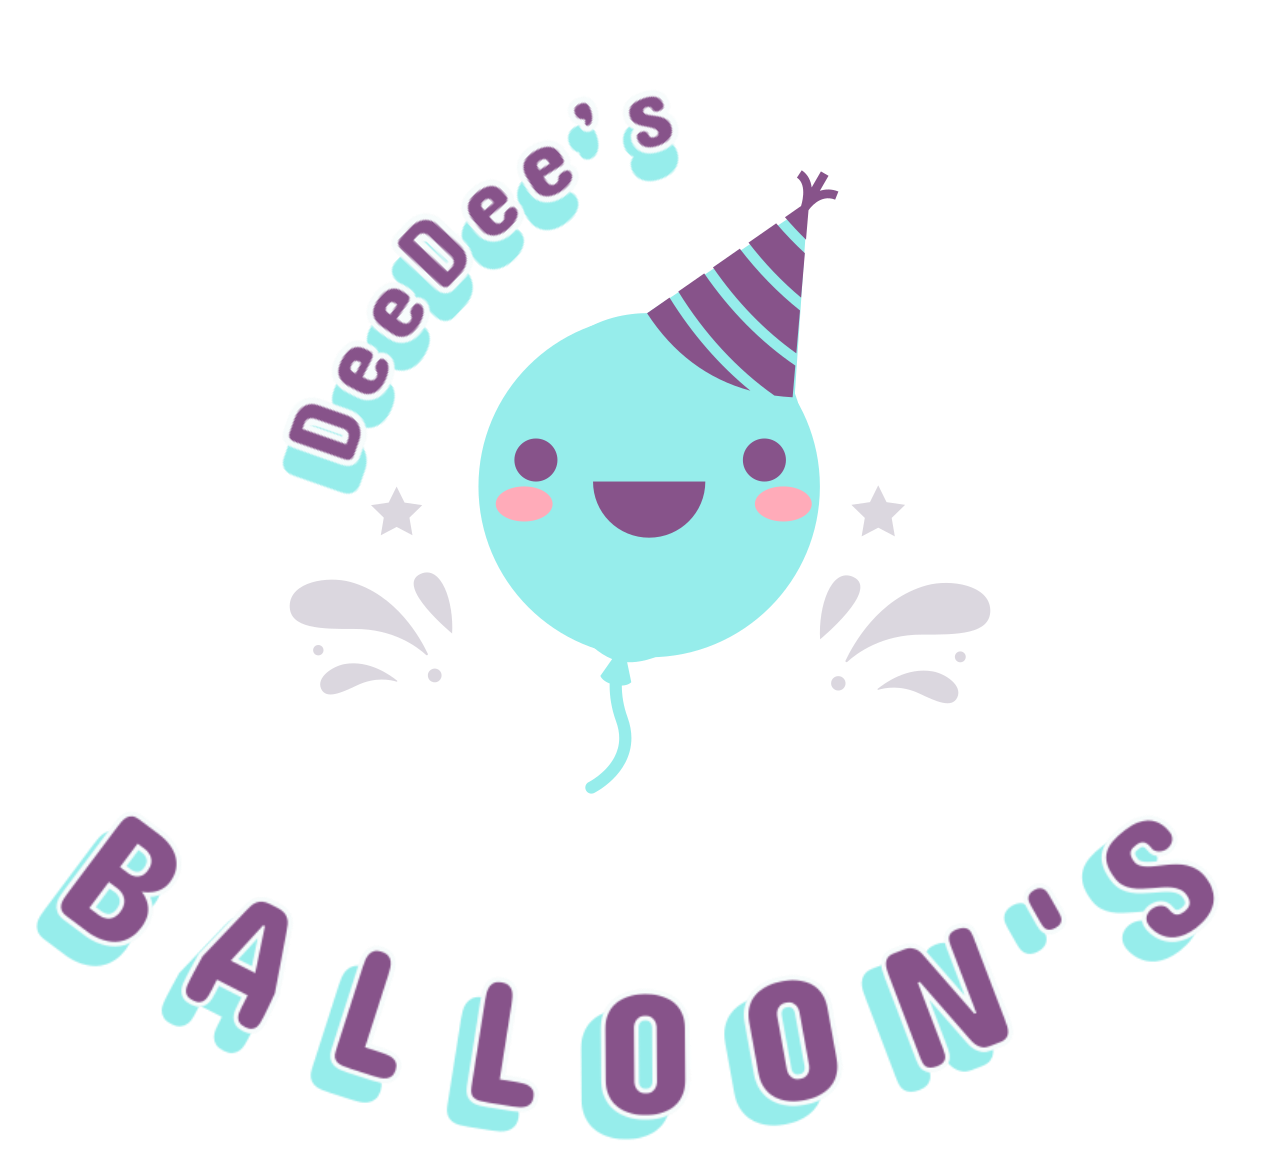 DeeDees Balloons's web page